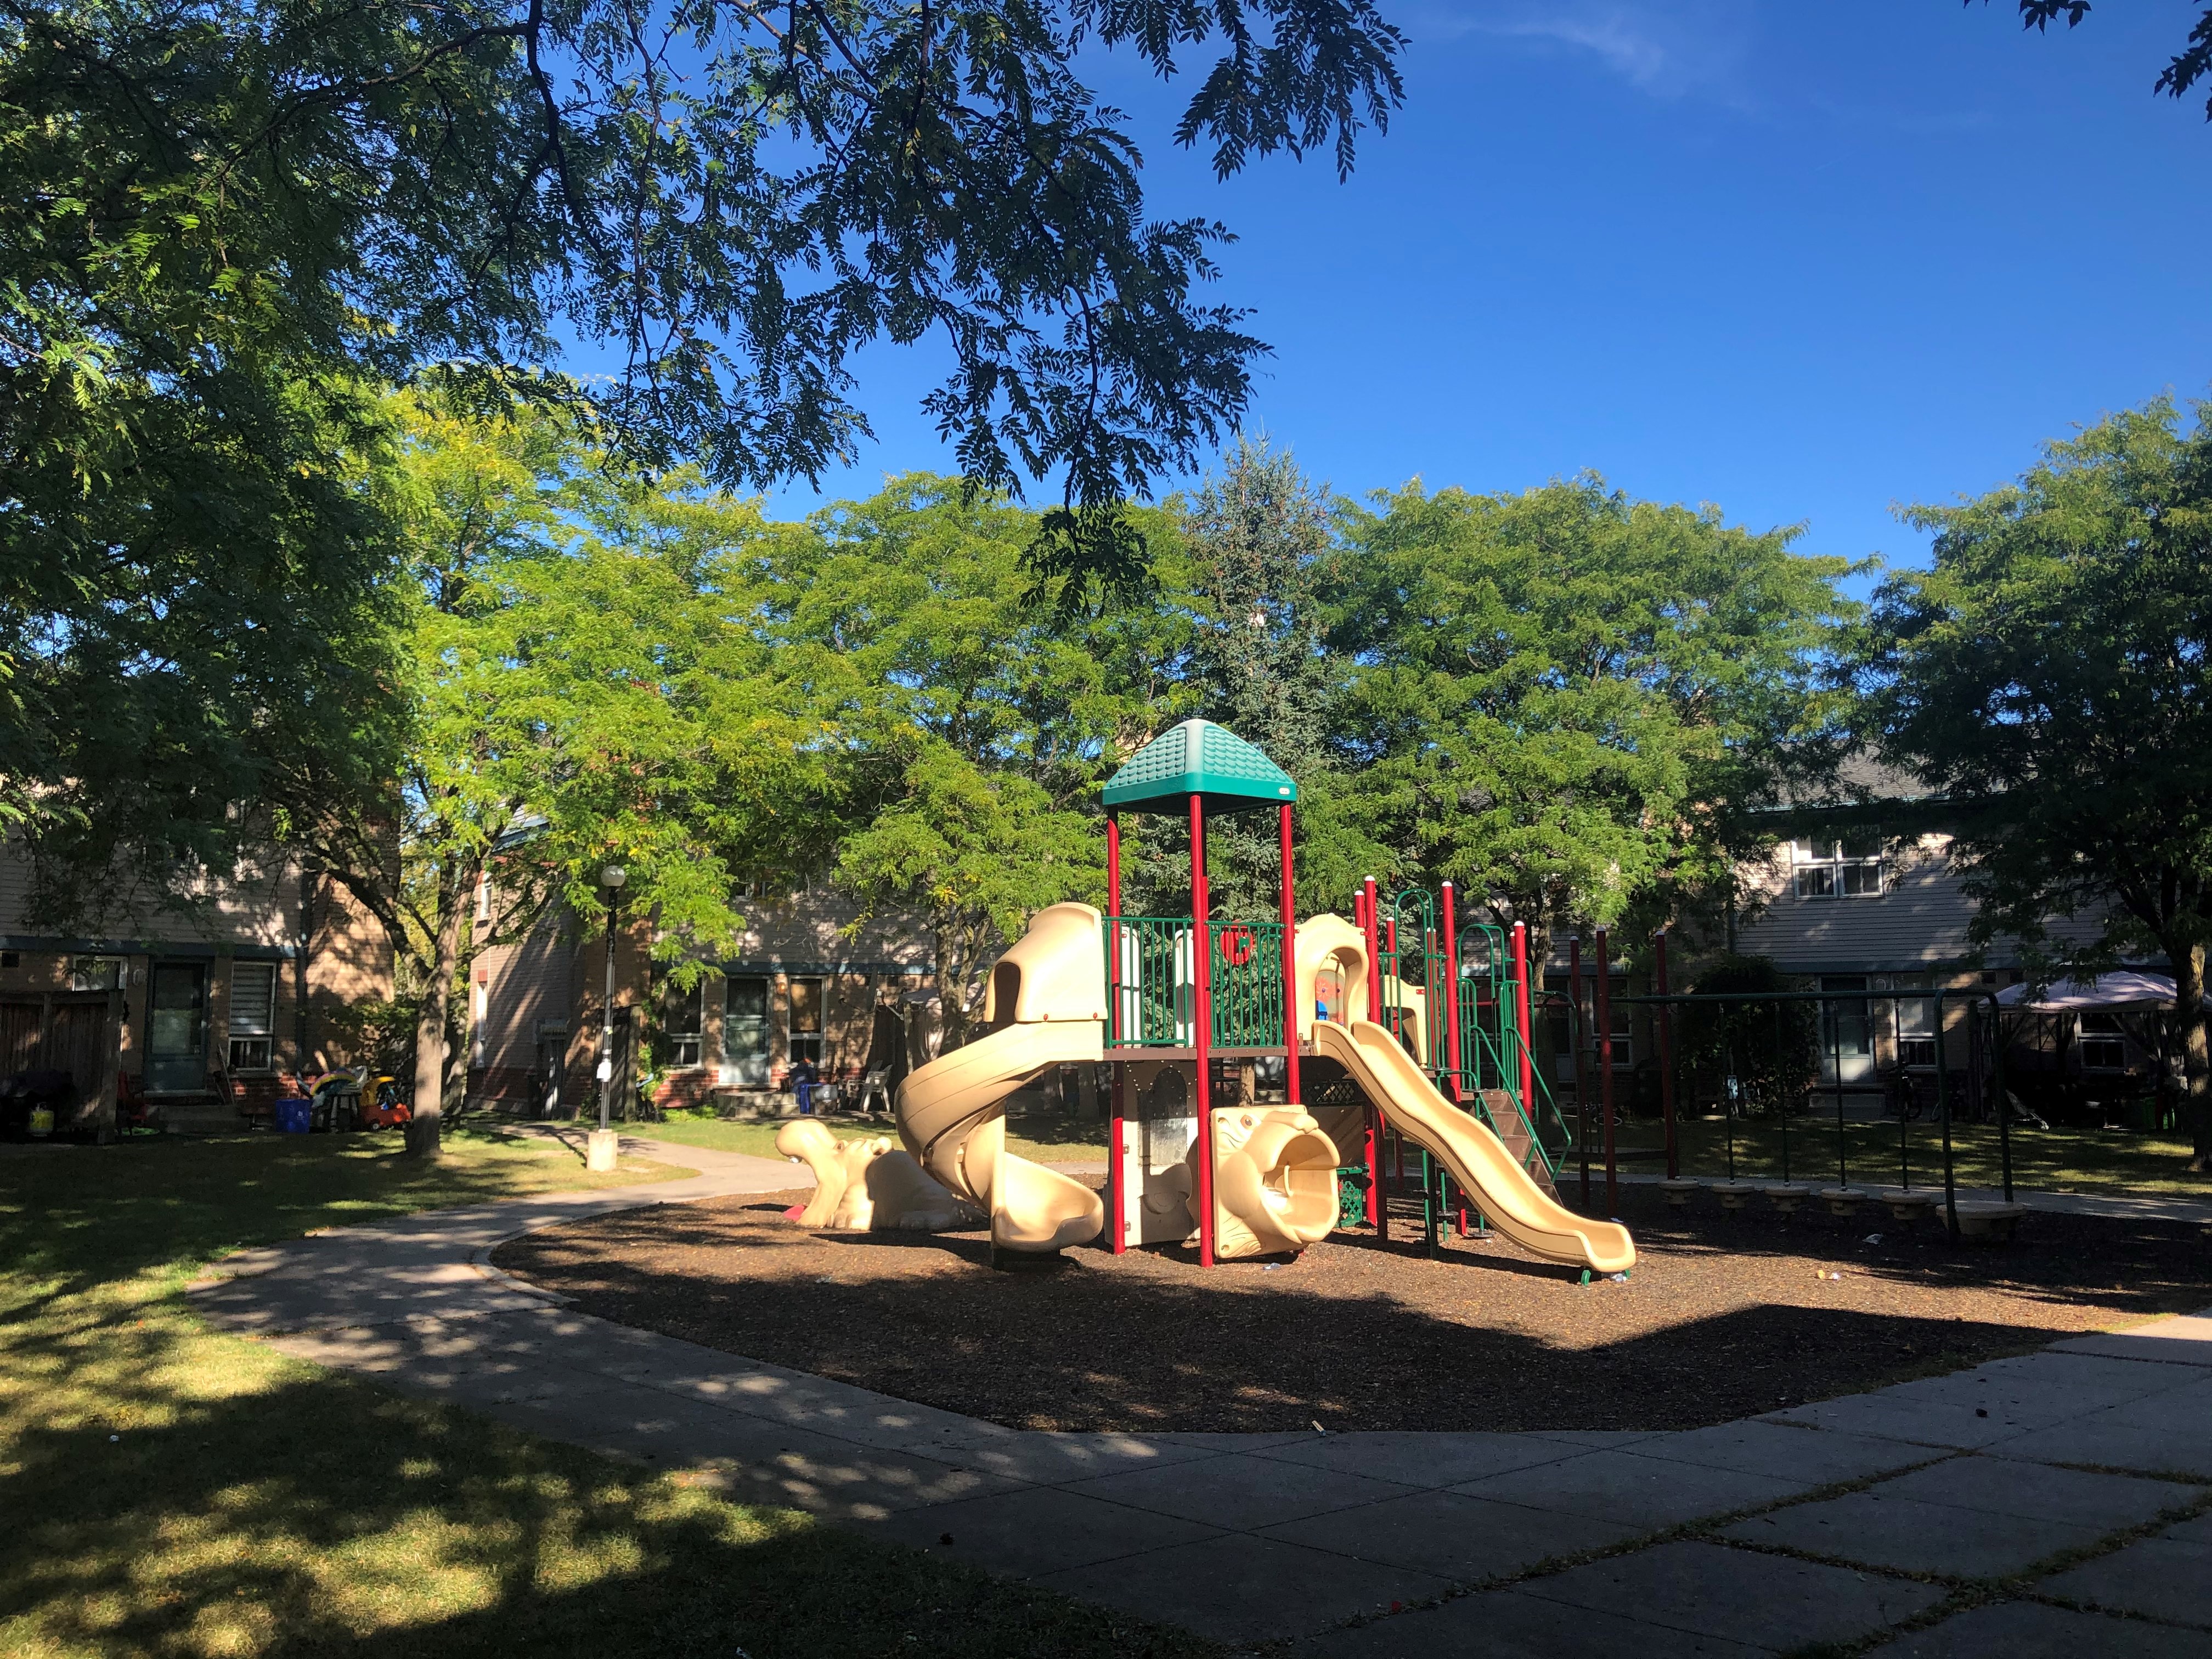 Playground with several trees surrounding